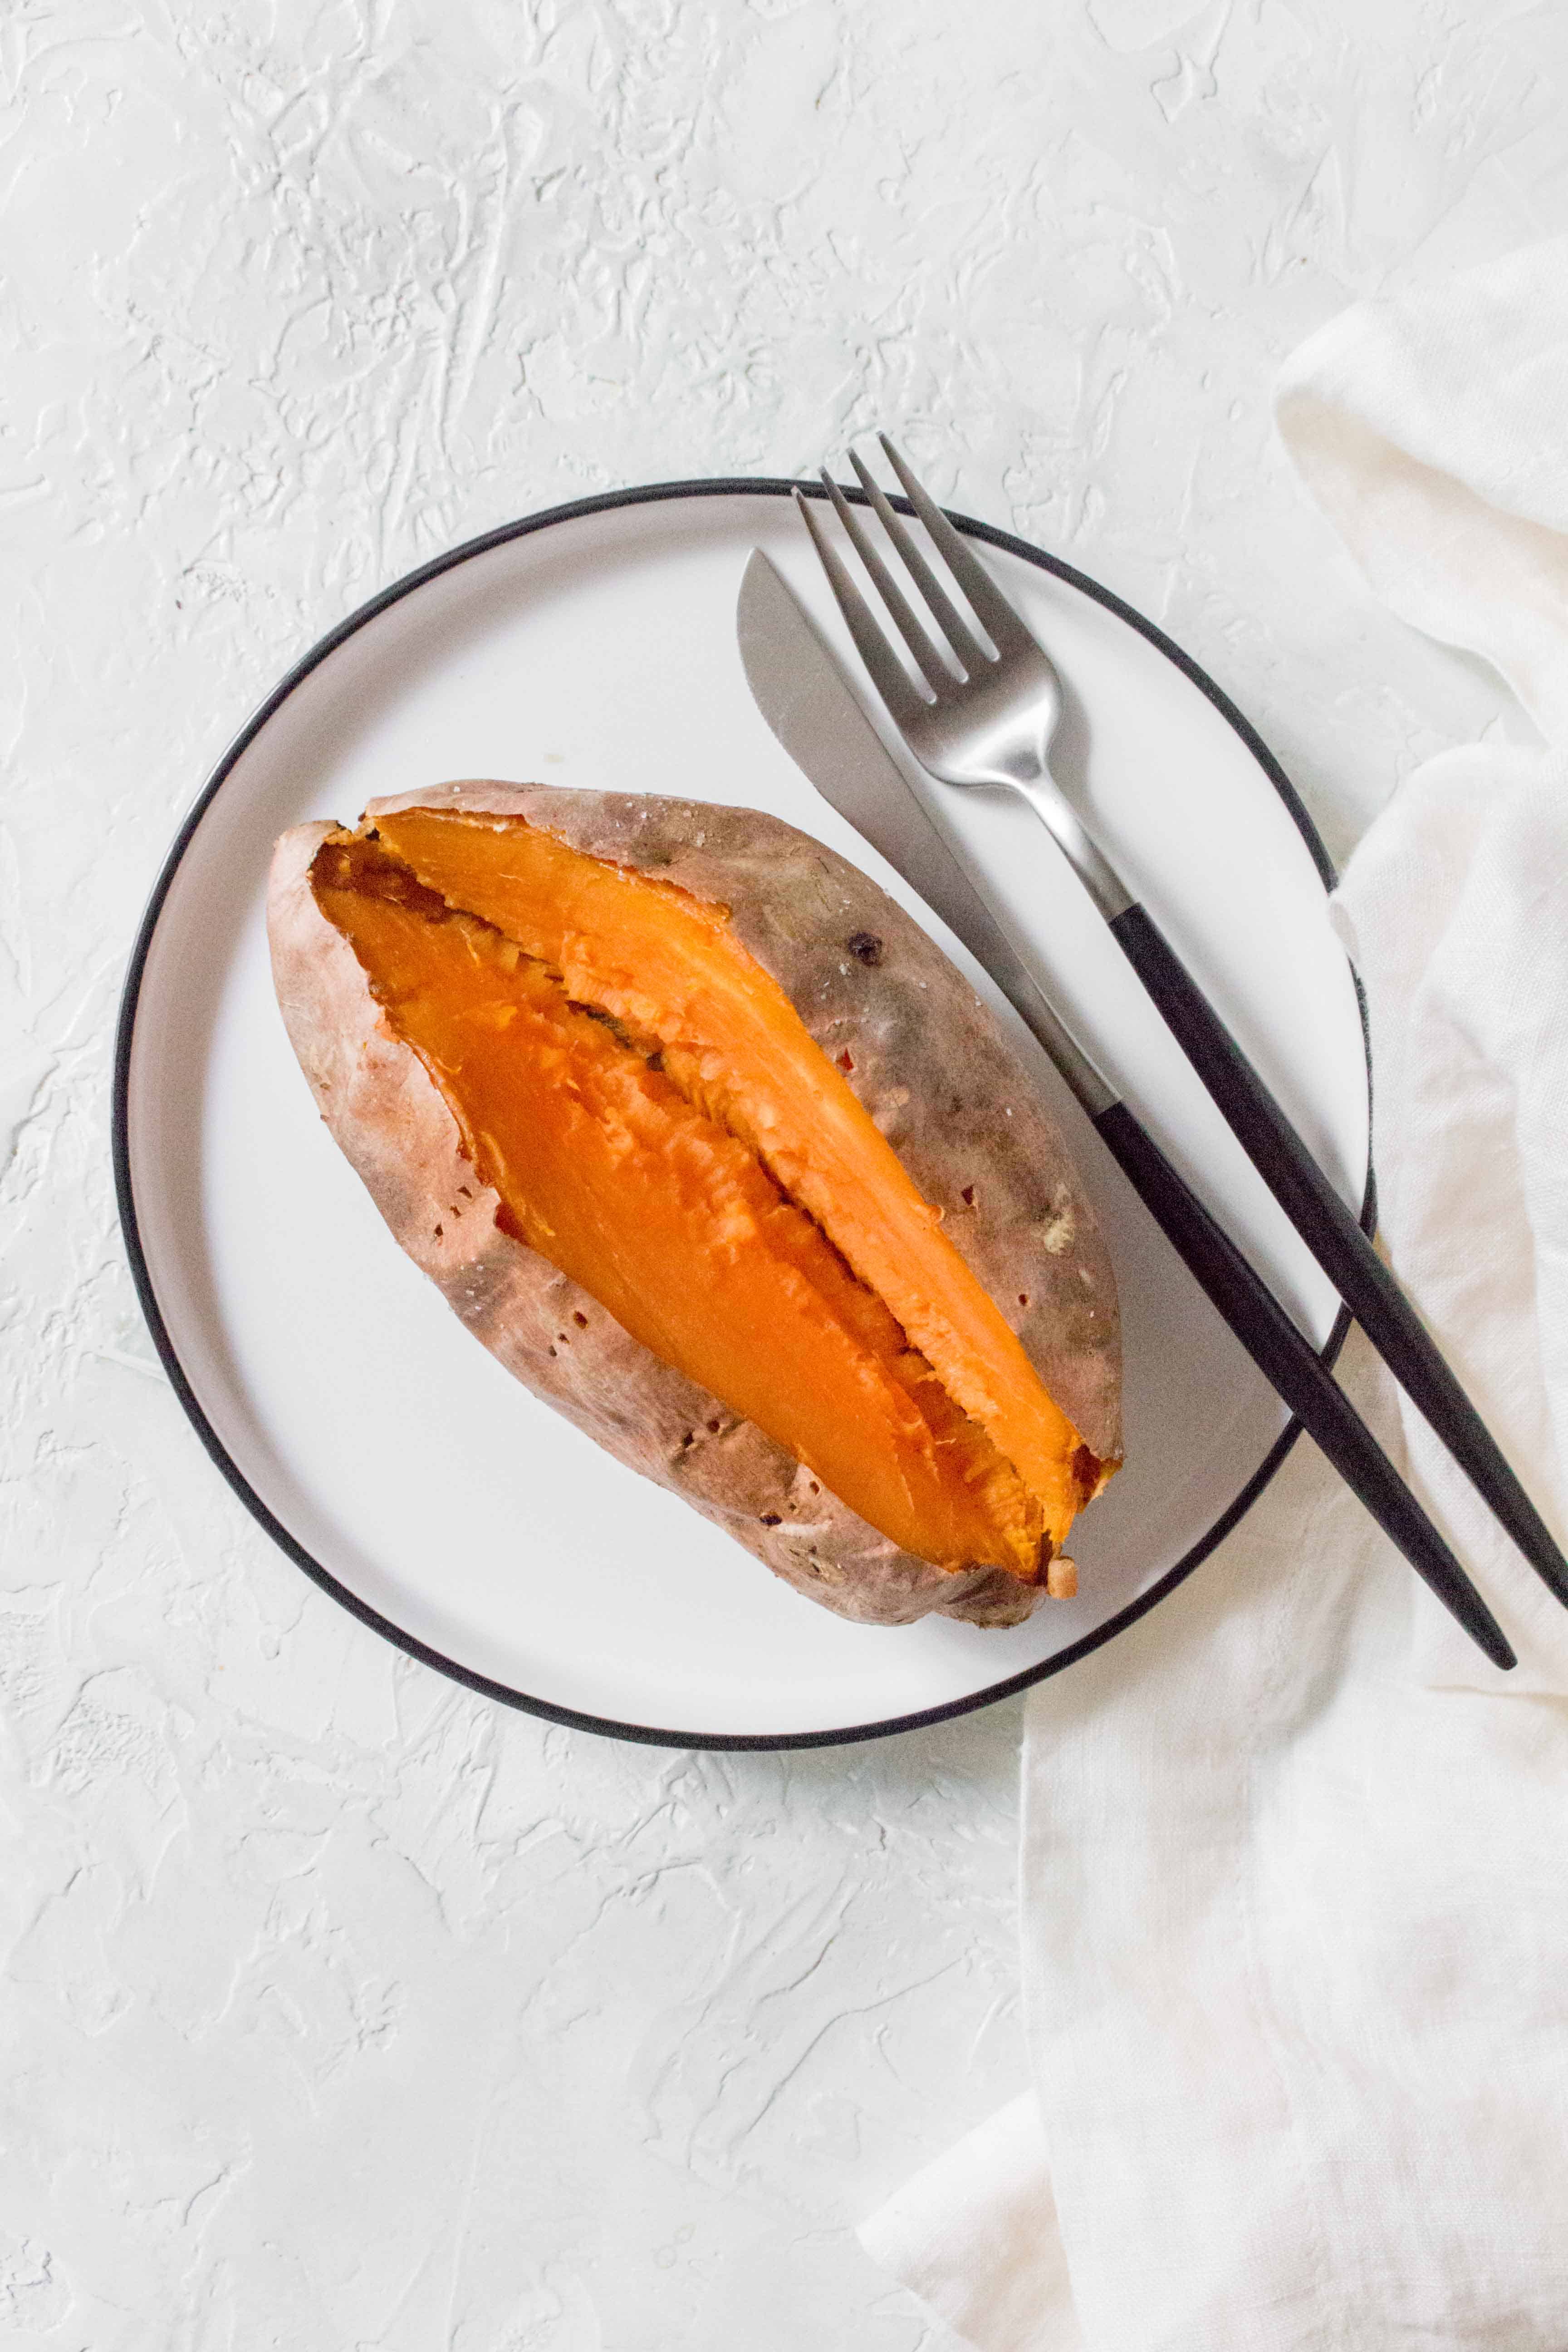 How To Make Baked Sweet Potatoes in the Air Fryer